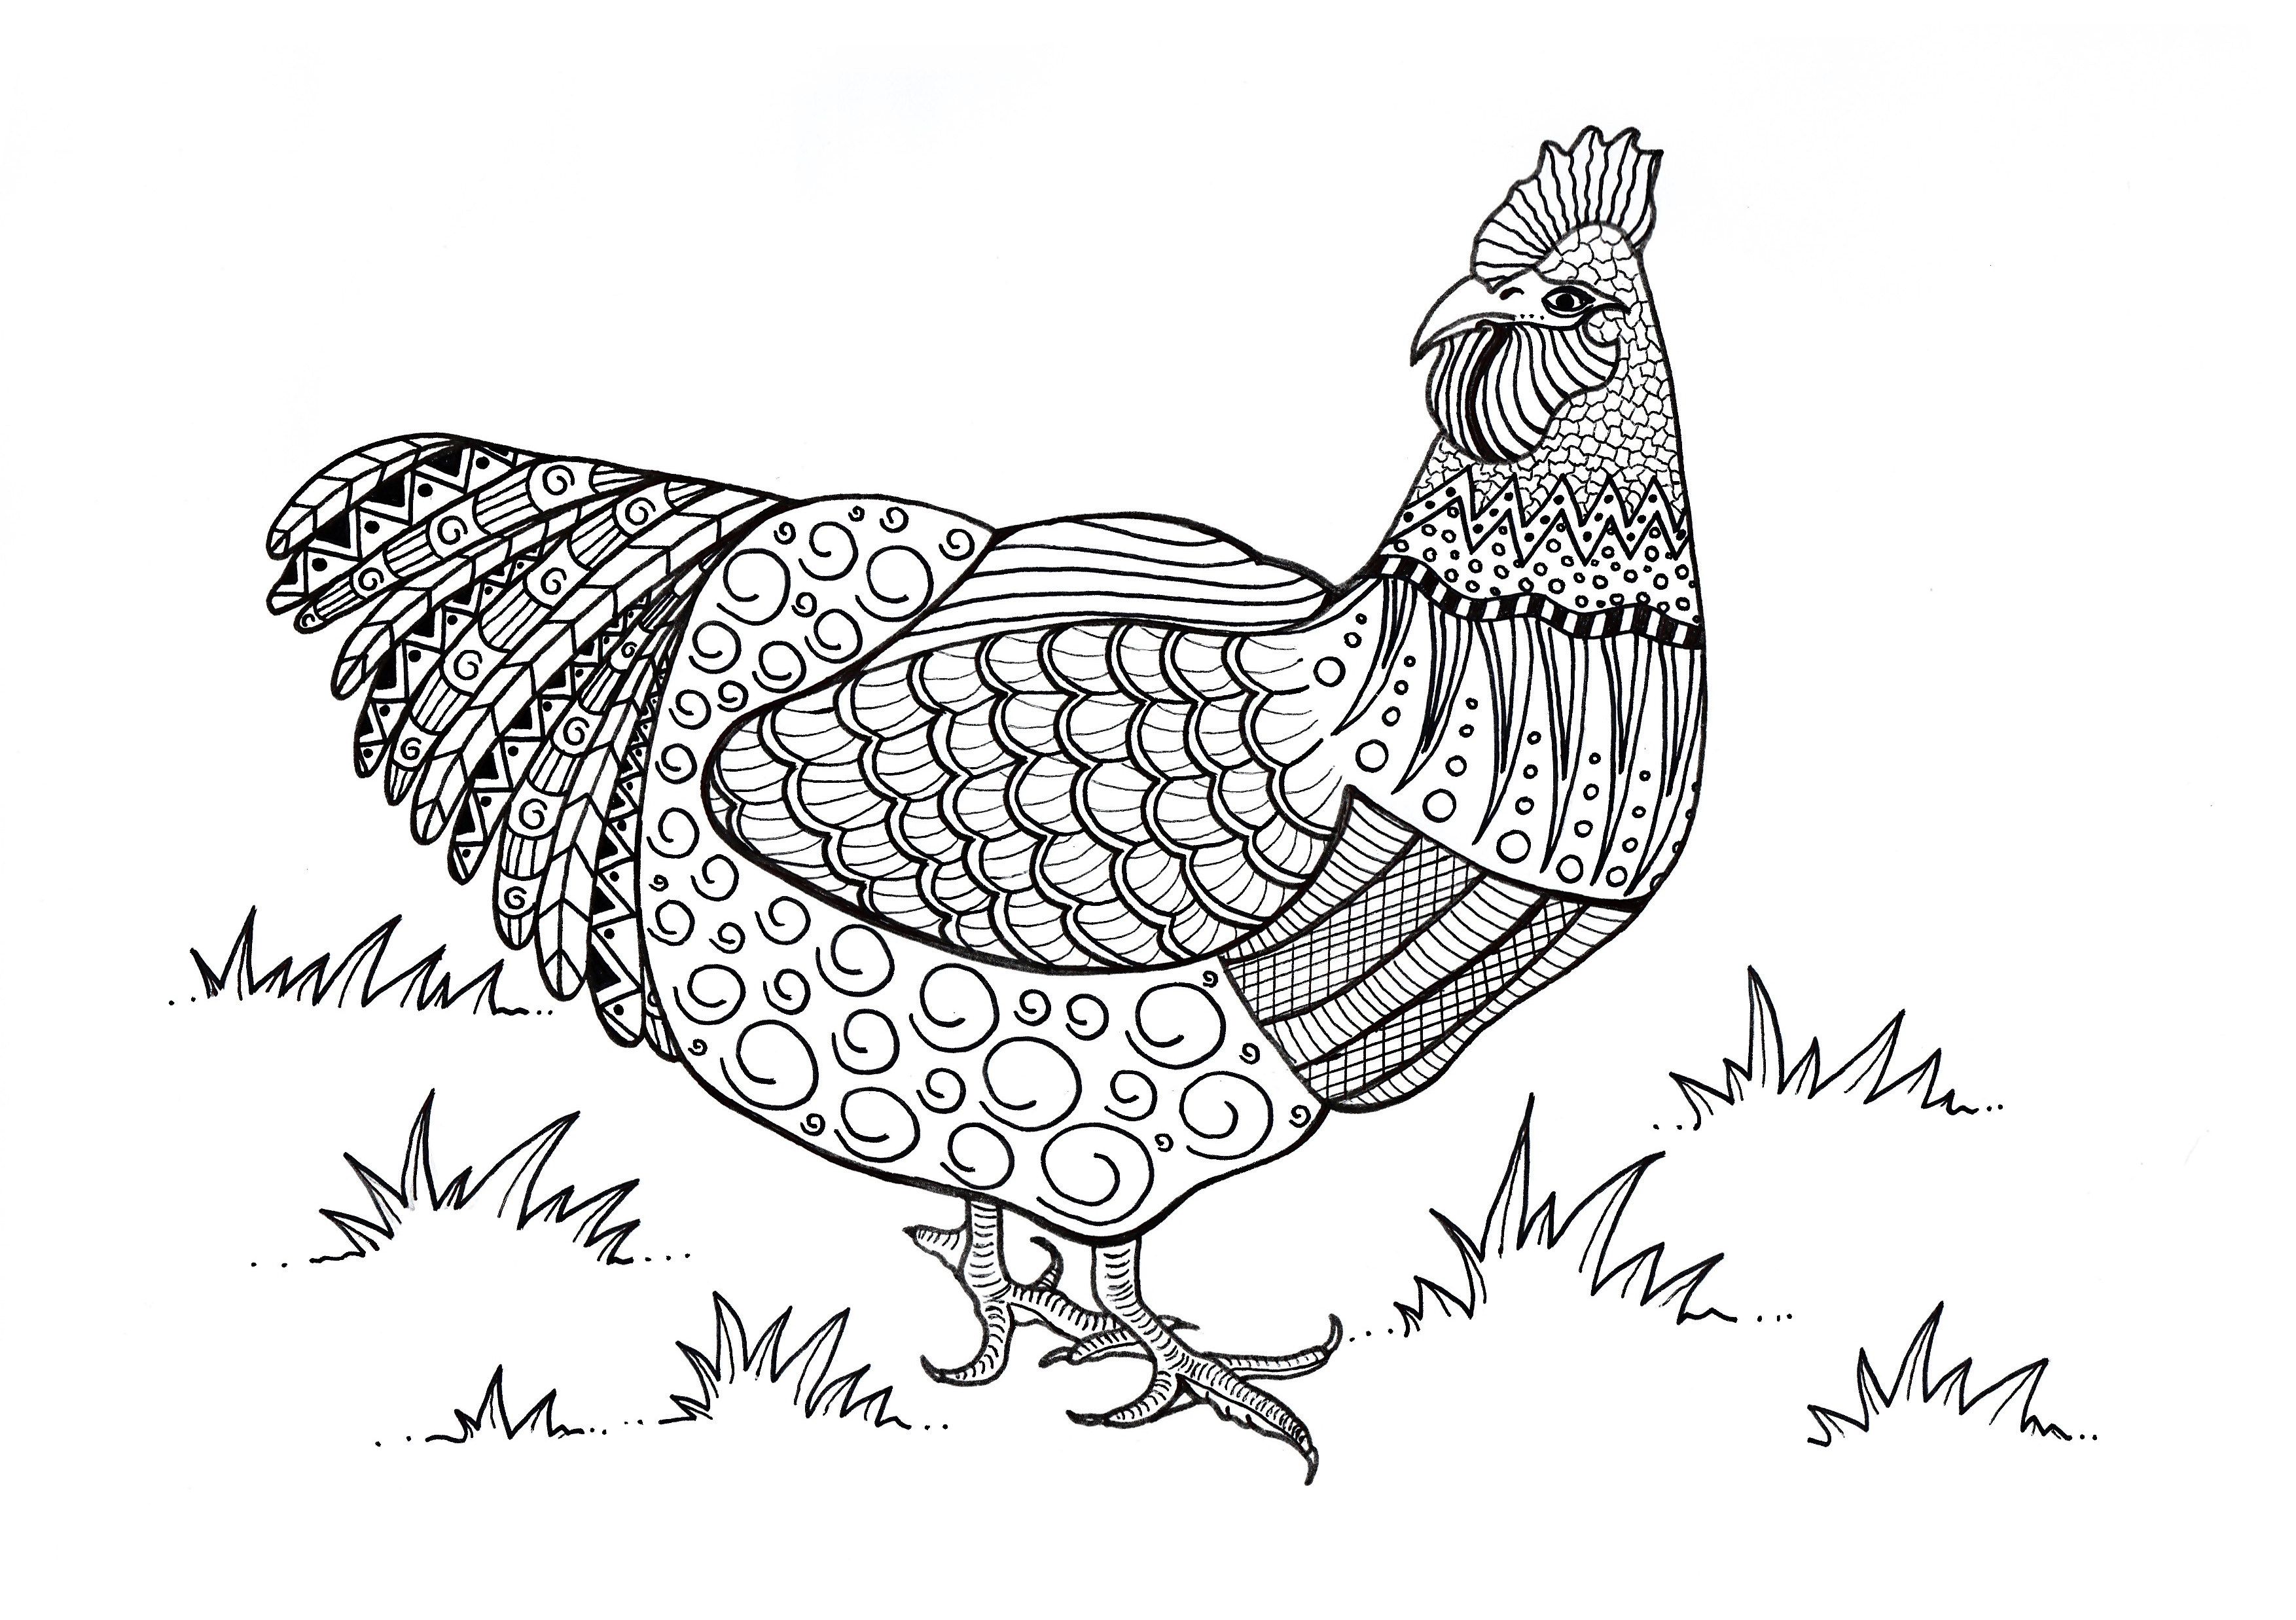 Coloring Pages For Adults Online
 FREE Adult Coloring Pages Happiness is Homemade